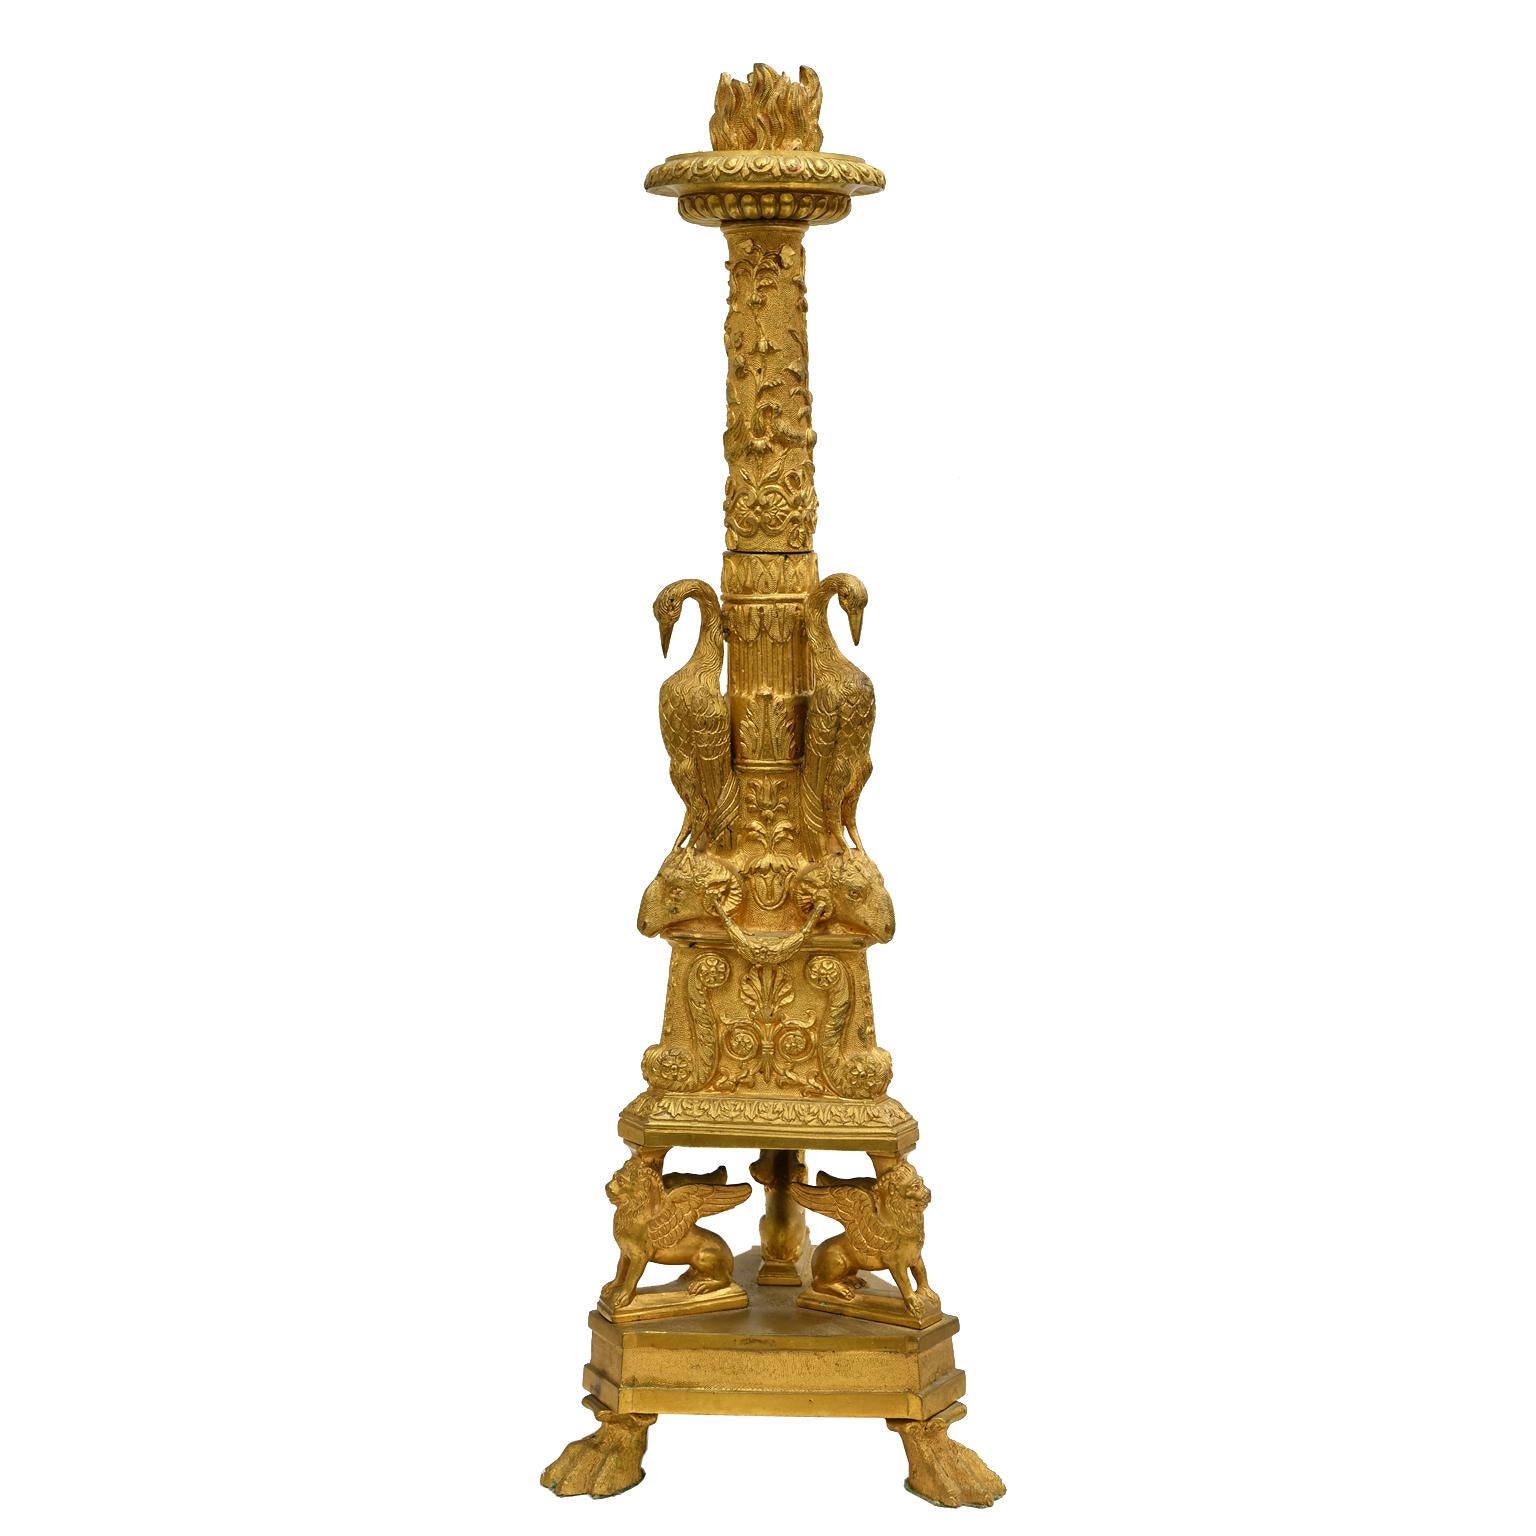 A fine pair of neoclassical architectural candlesticks in gilt bronze (bronze doré) after a design by Giovanni Battista Piranesi (Italian, 1720-1778) with flame nozzles and lobed drip pans on foliate-decorated columns resting on a triangular base